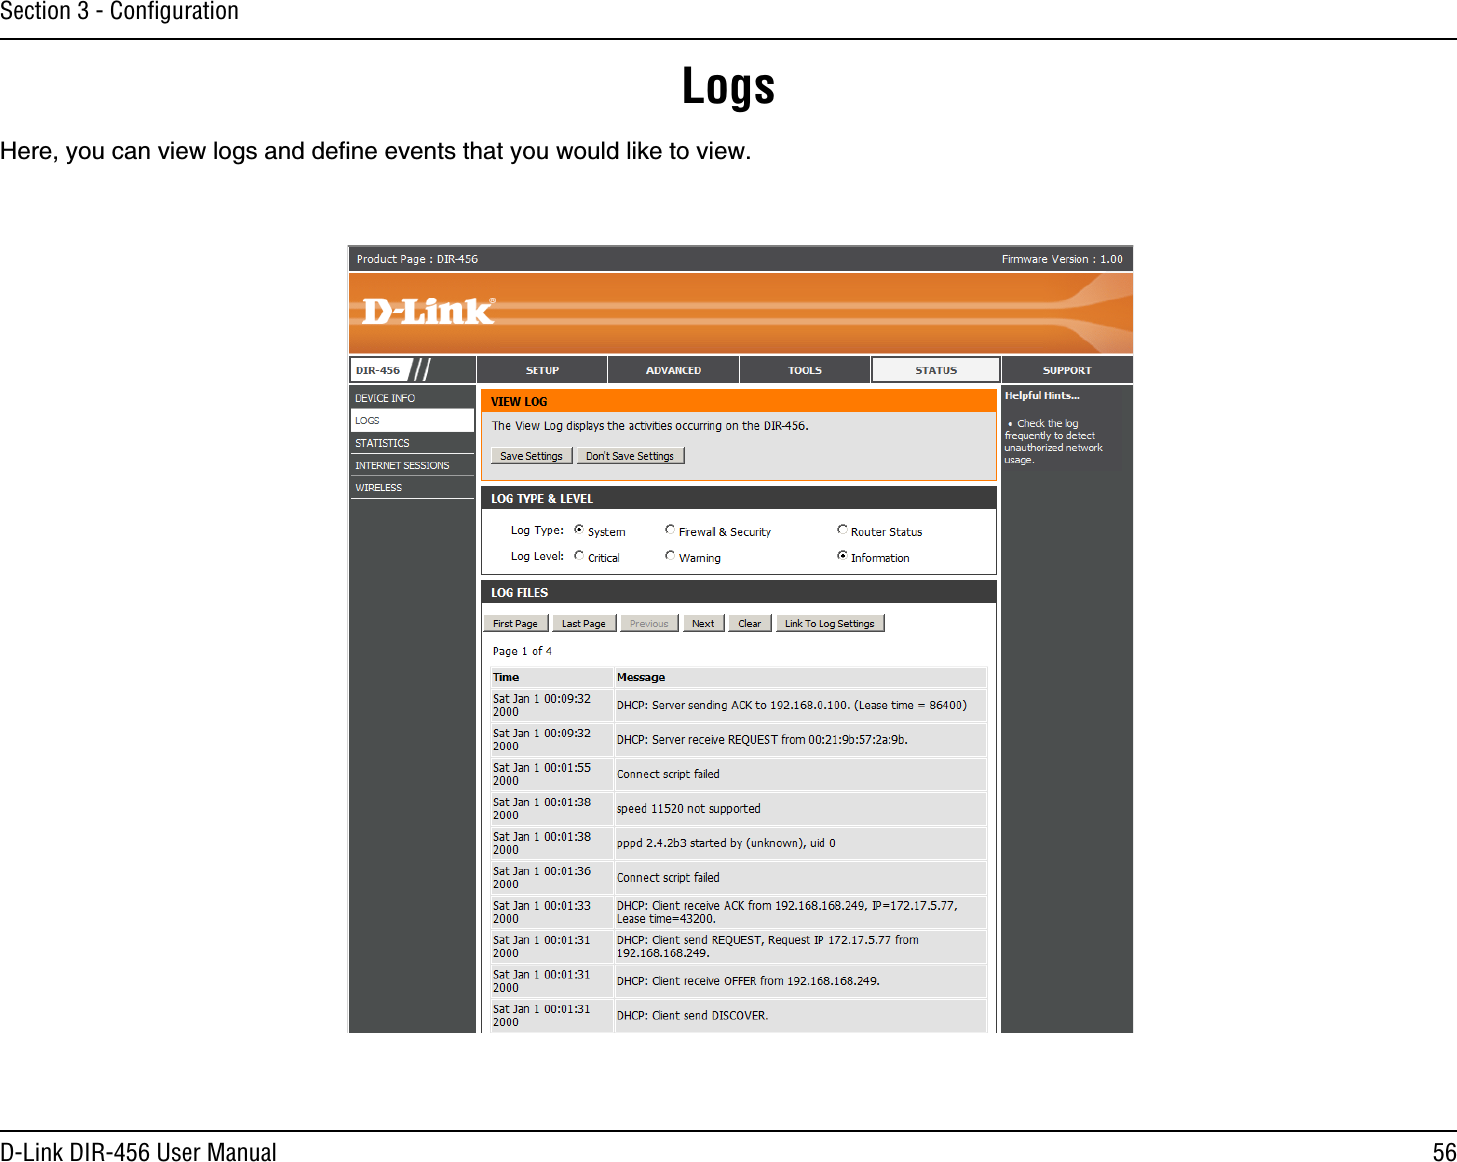 56D-Link DIR-456 User ManualSection 3 - ConﬁgurationLogsHere, you can view logs and deﬁne events that you would like to view. 